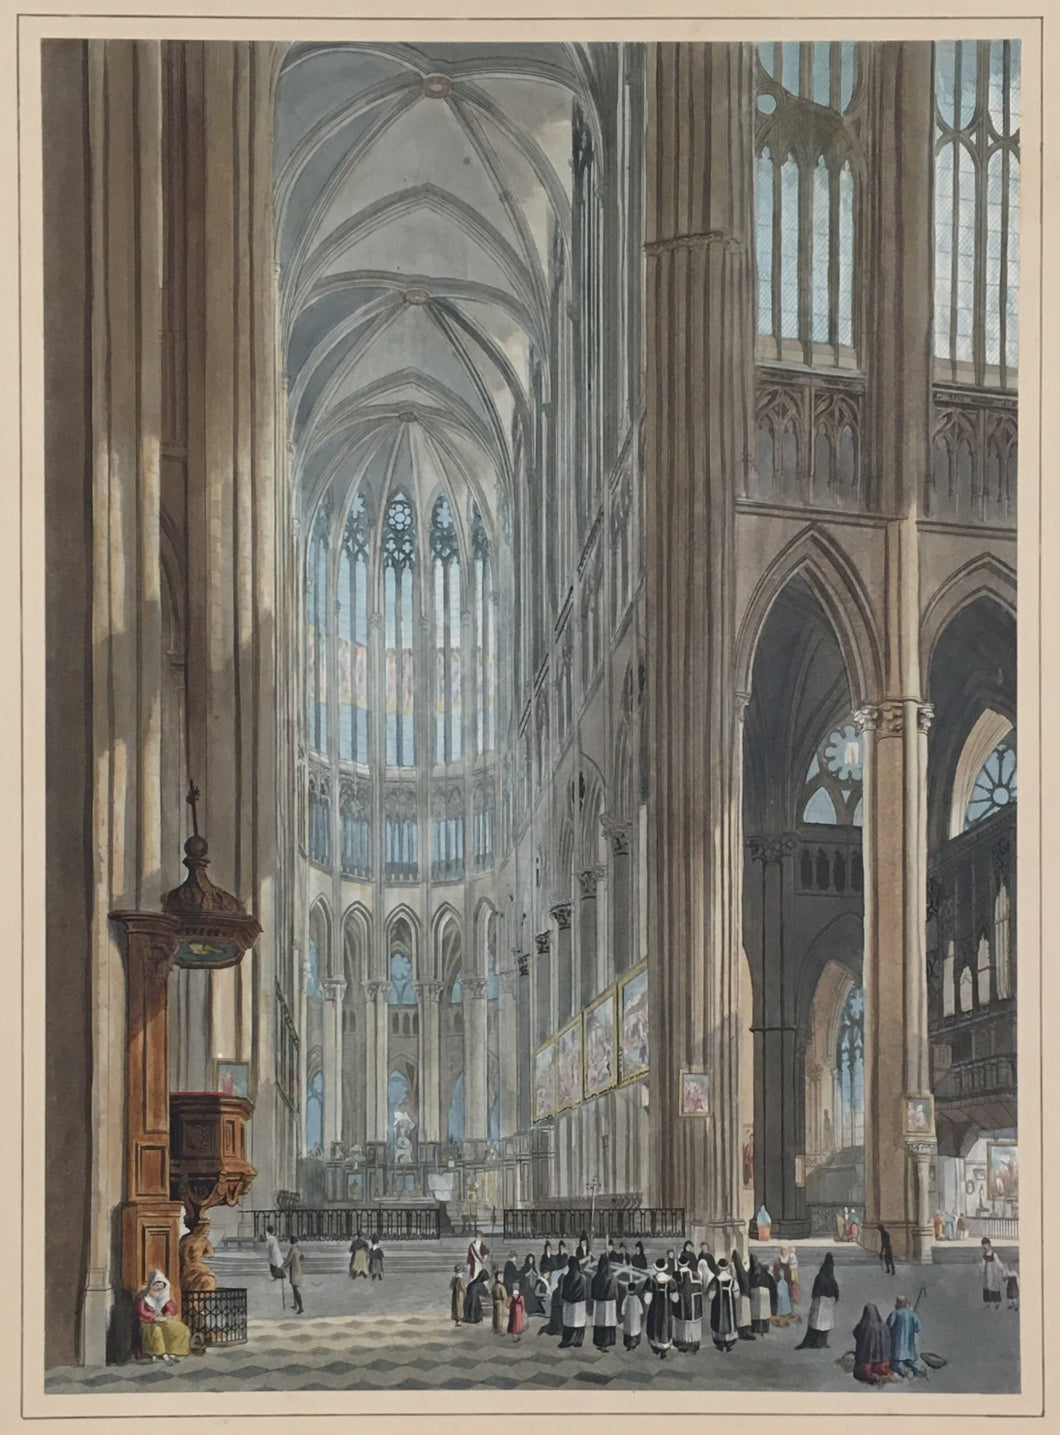 Wild, C. “Choir of the Cathedral of Beauvais.” From 